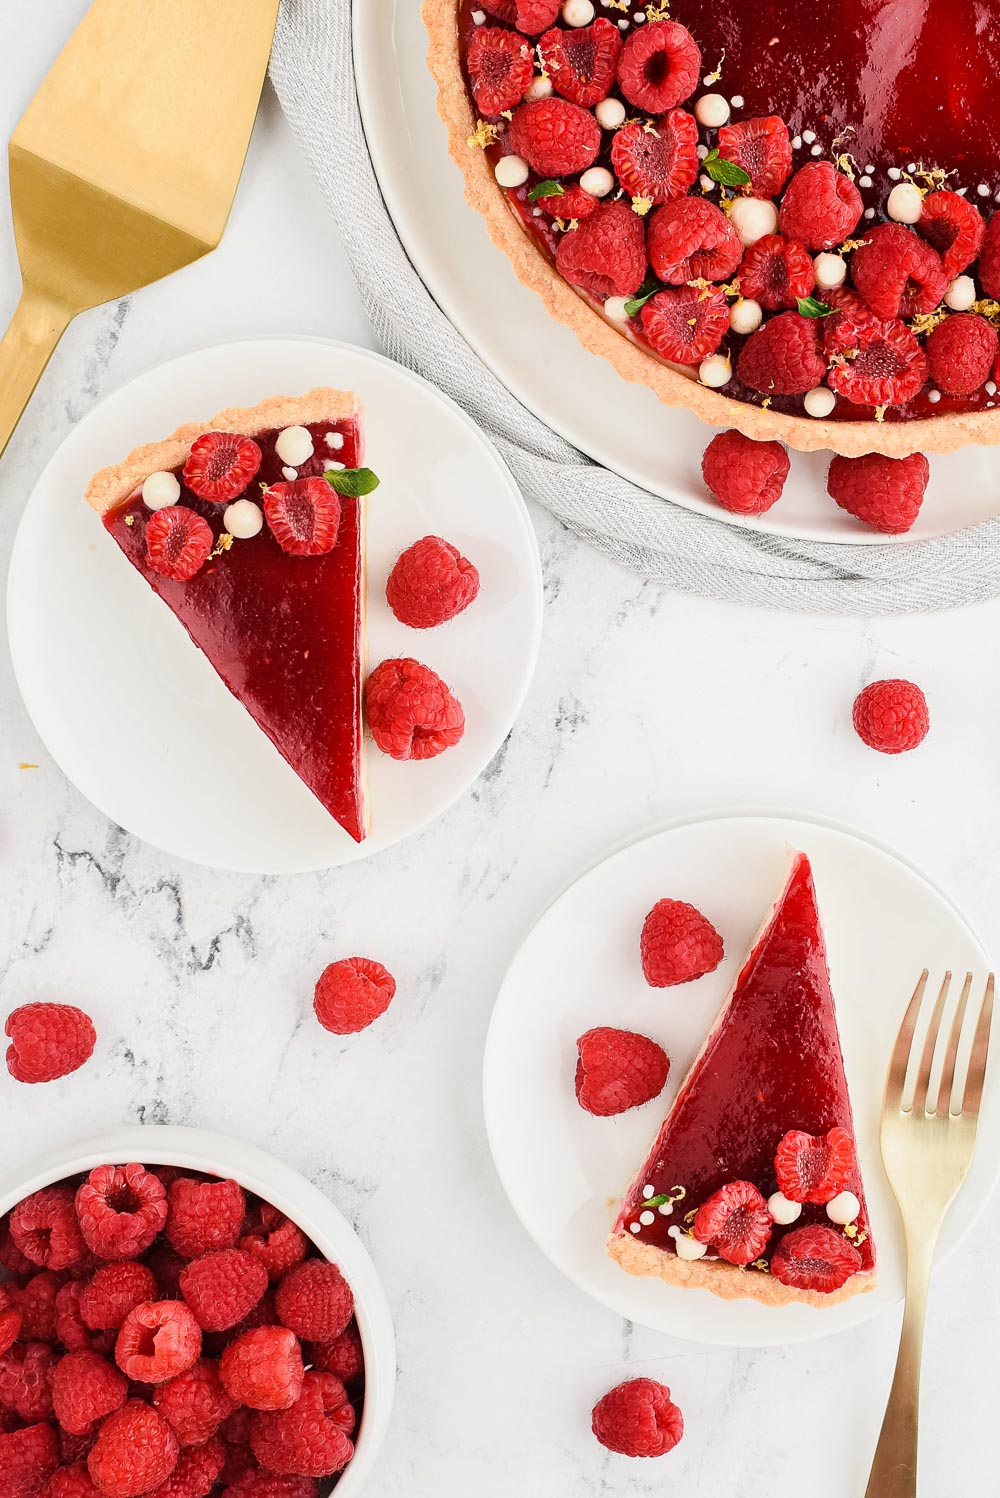 Fruit dessert on a white plate with raspberries on the side. There are two white plates with slices of the tart on them with gold utensils.